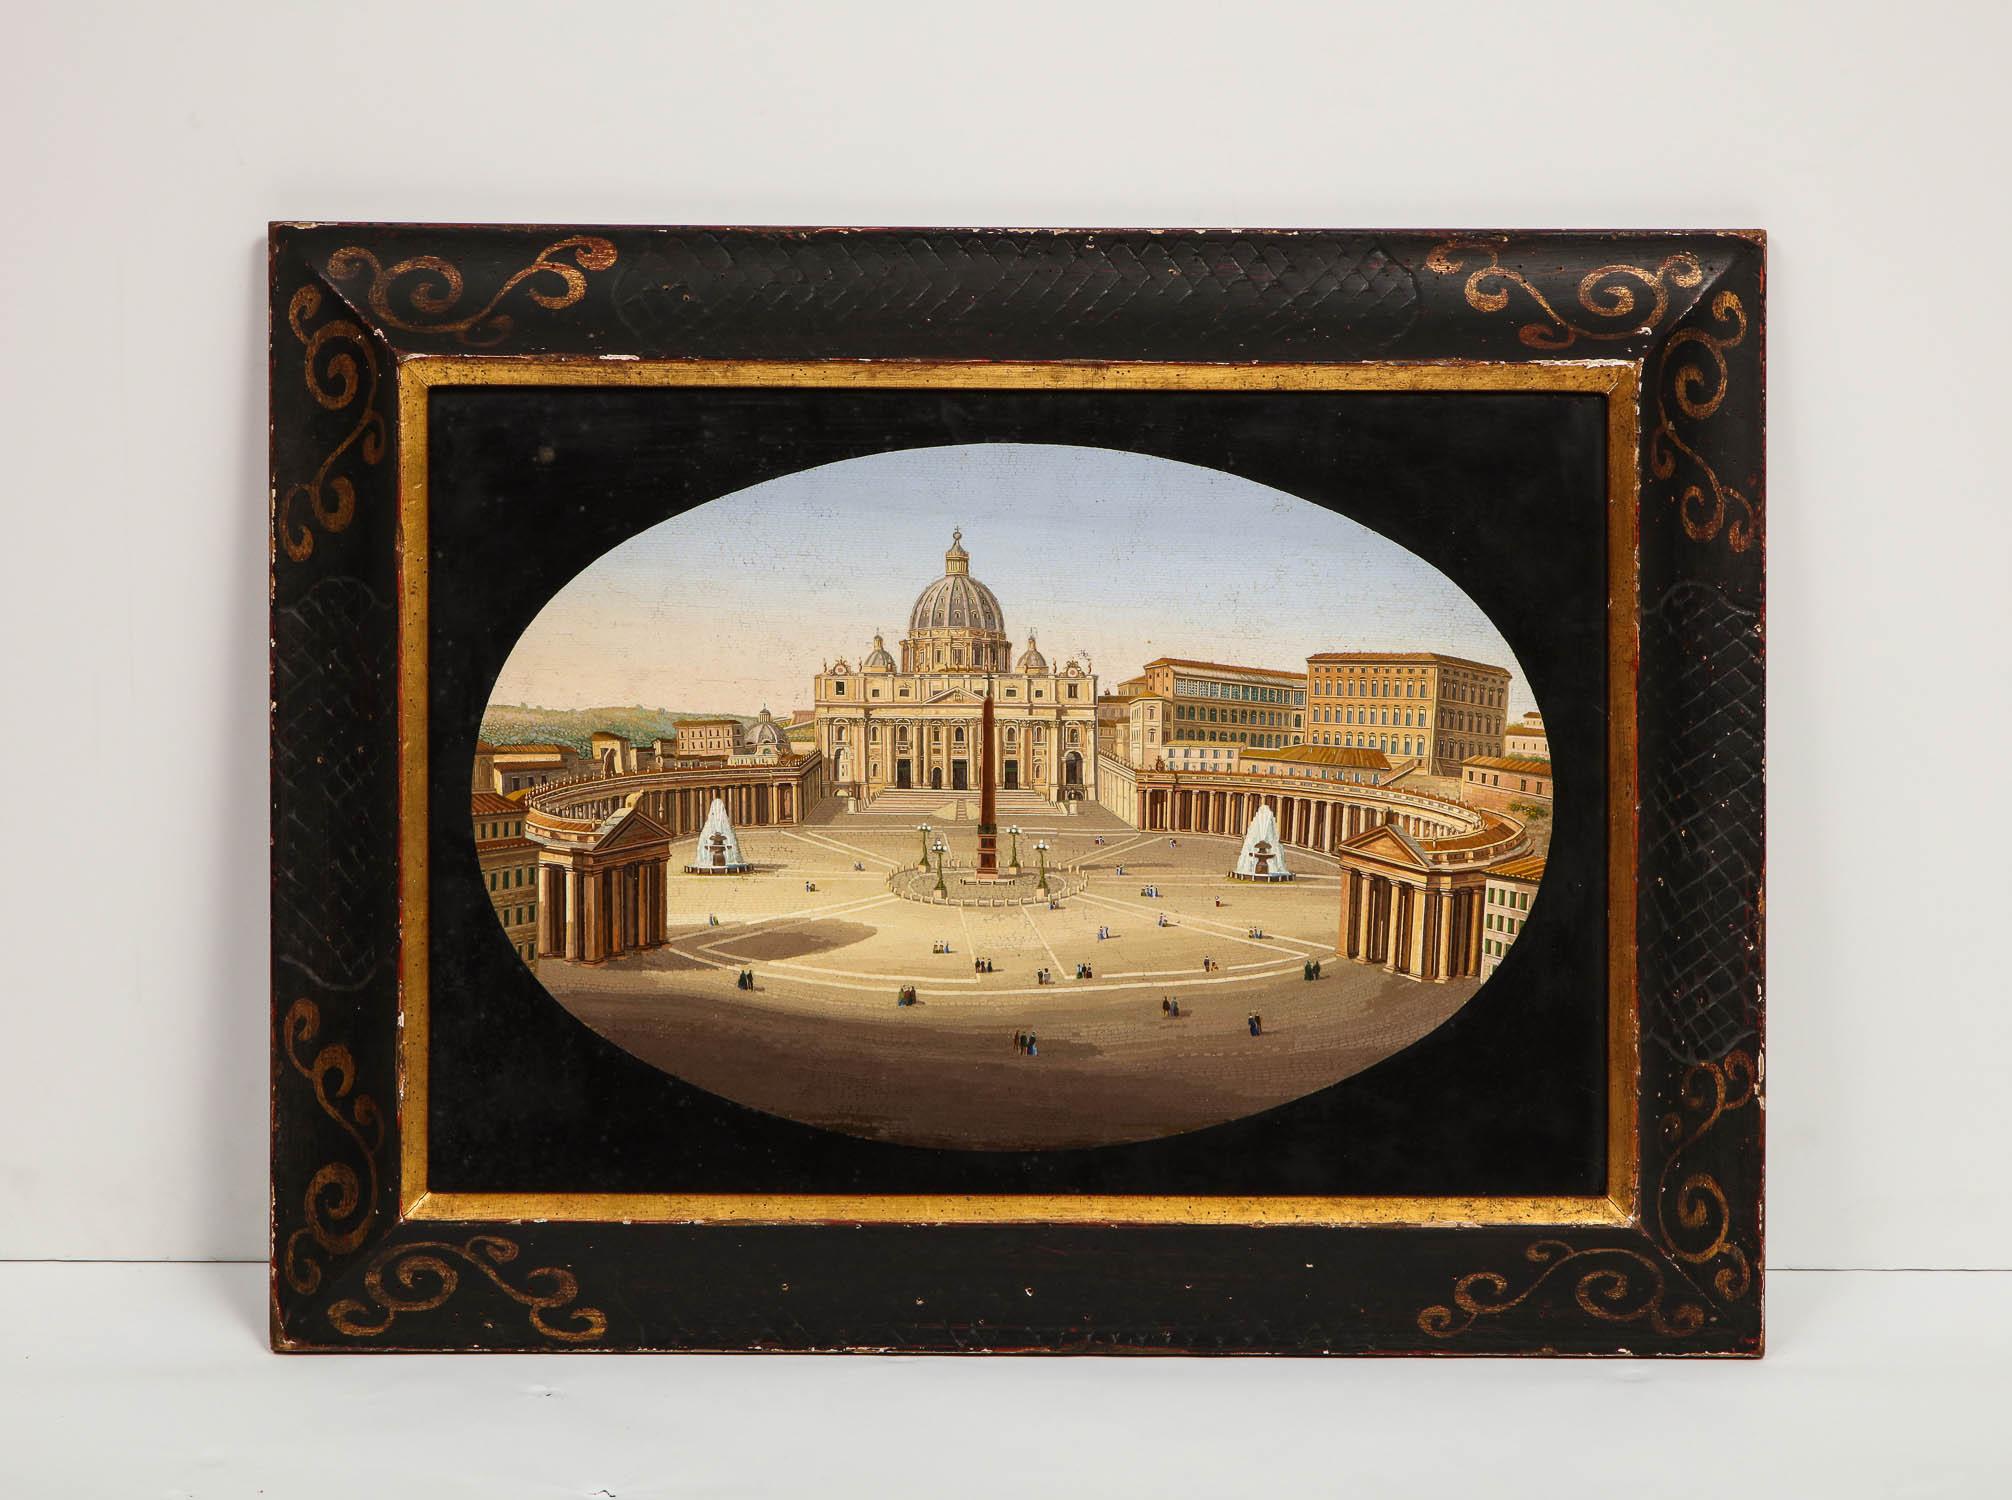 Large Italian Micromosaic Plaque of St. Peter’s Basilica, Venice, circa 1860, in original frame.

Possibly made by the Vatican Mosaic Studio.

Very dine quality and detail. Very good condition.

Measures: Mosaic slate: 22